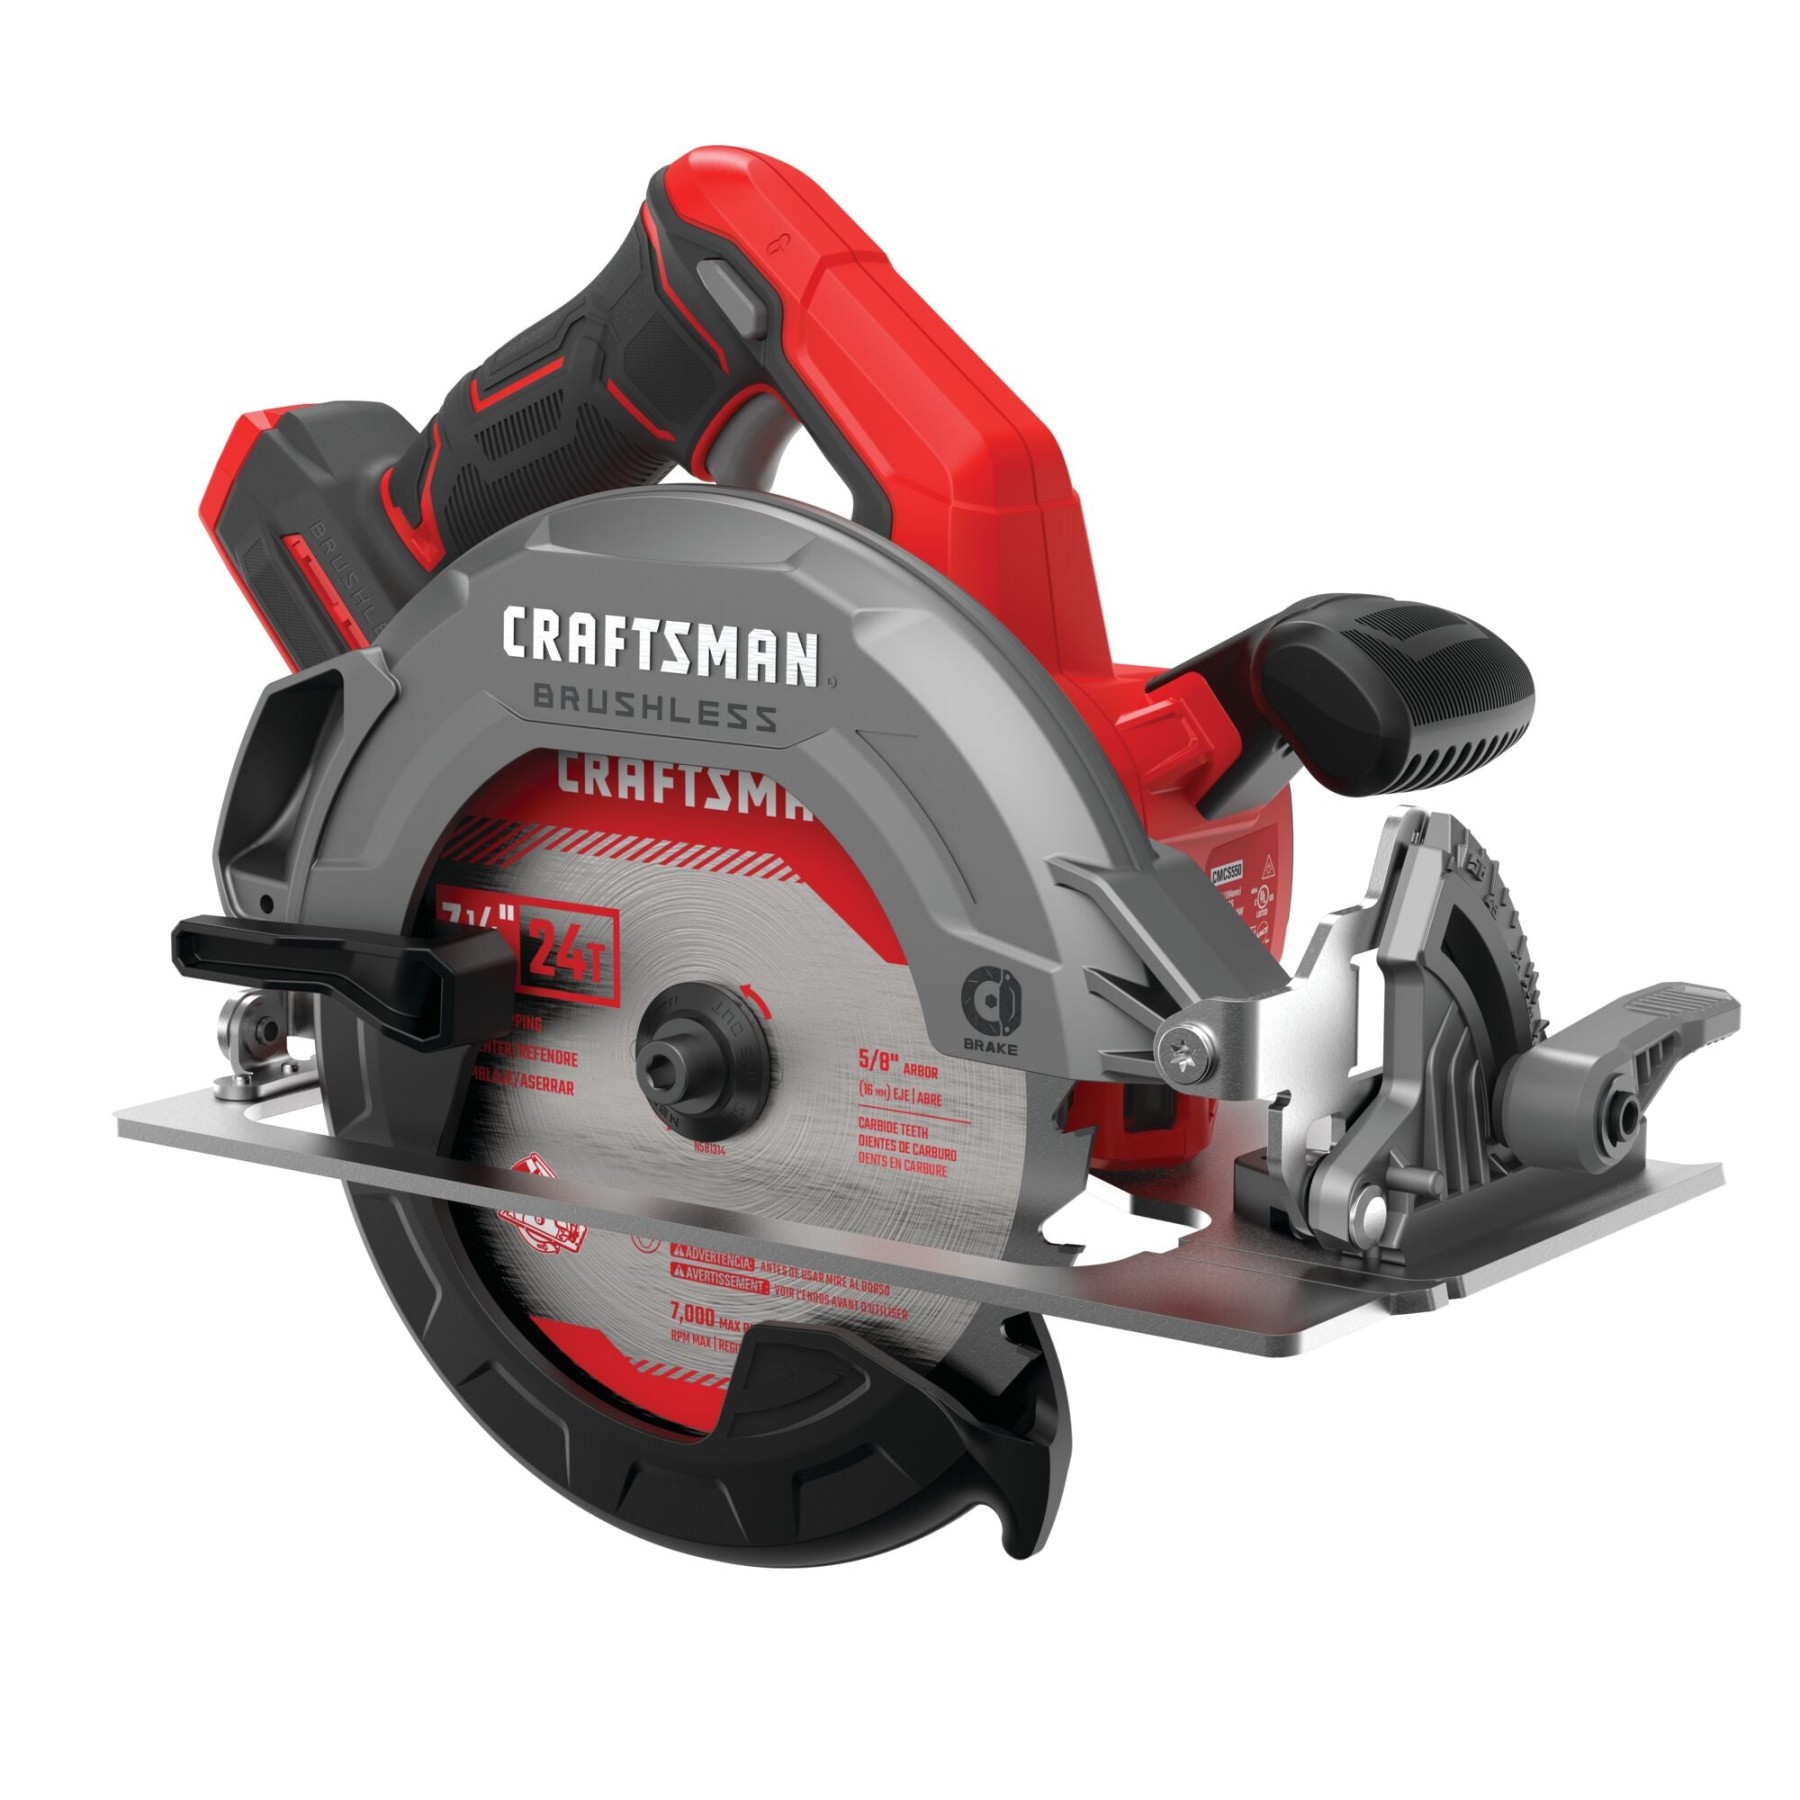 v-in-brushless-cordless-circular-saw-craftsman Craftsman Cordless Skill Saw Review: Cutting Through The Hype? picture